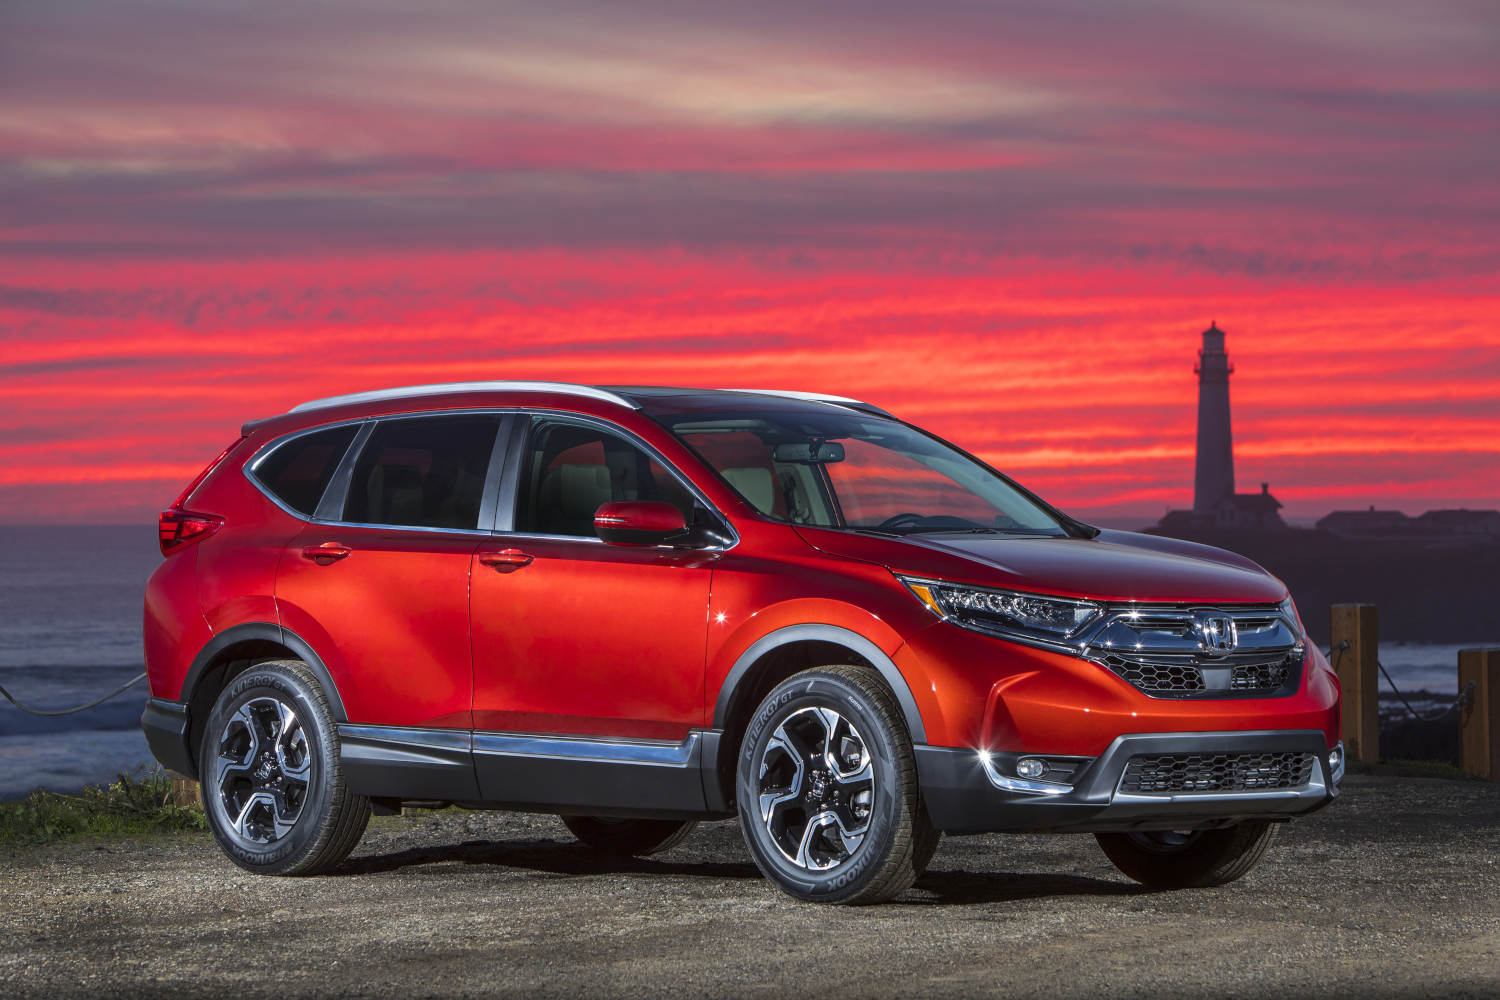 The best used SUVs include this 2017 Honda CR-V